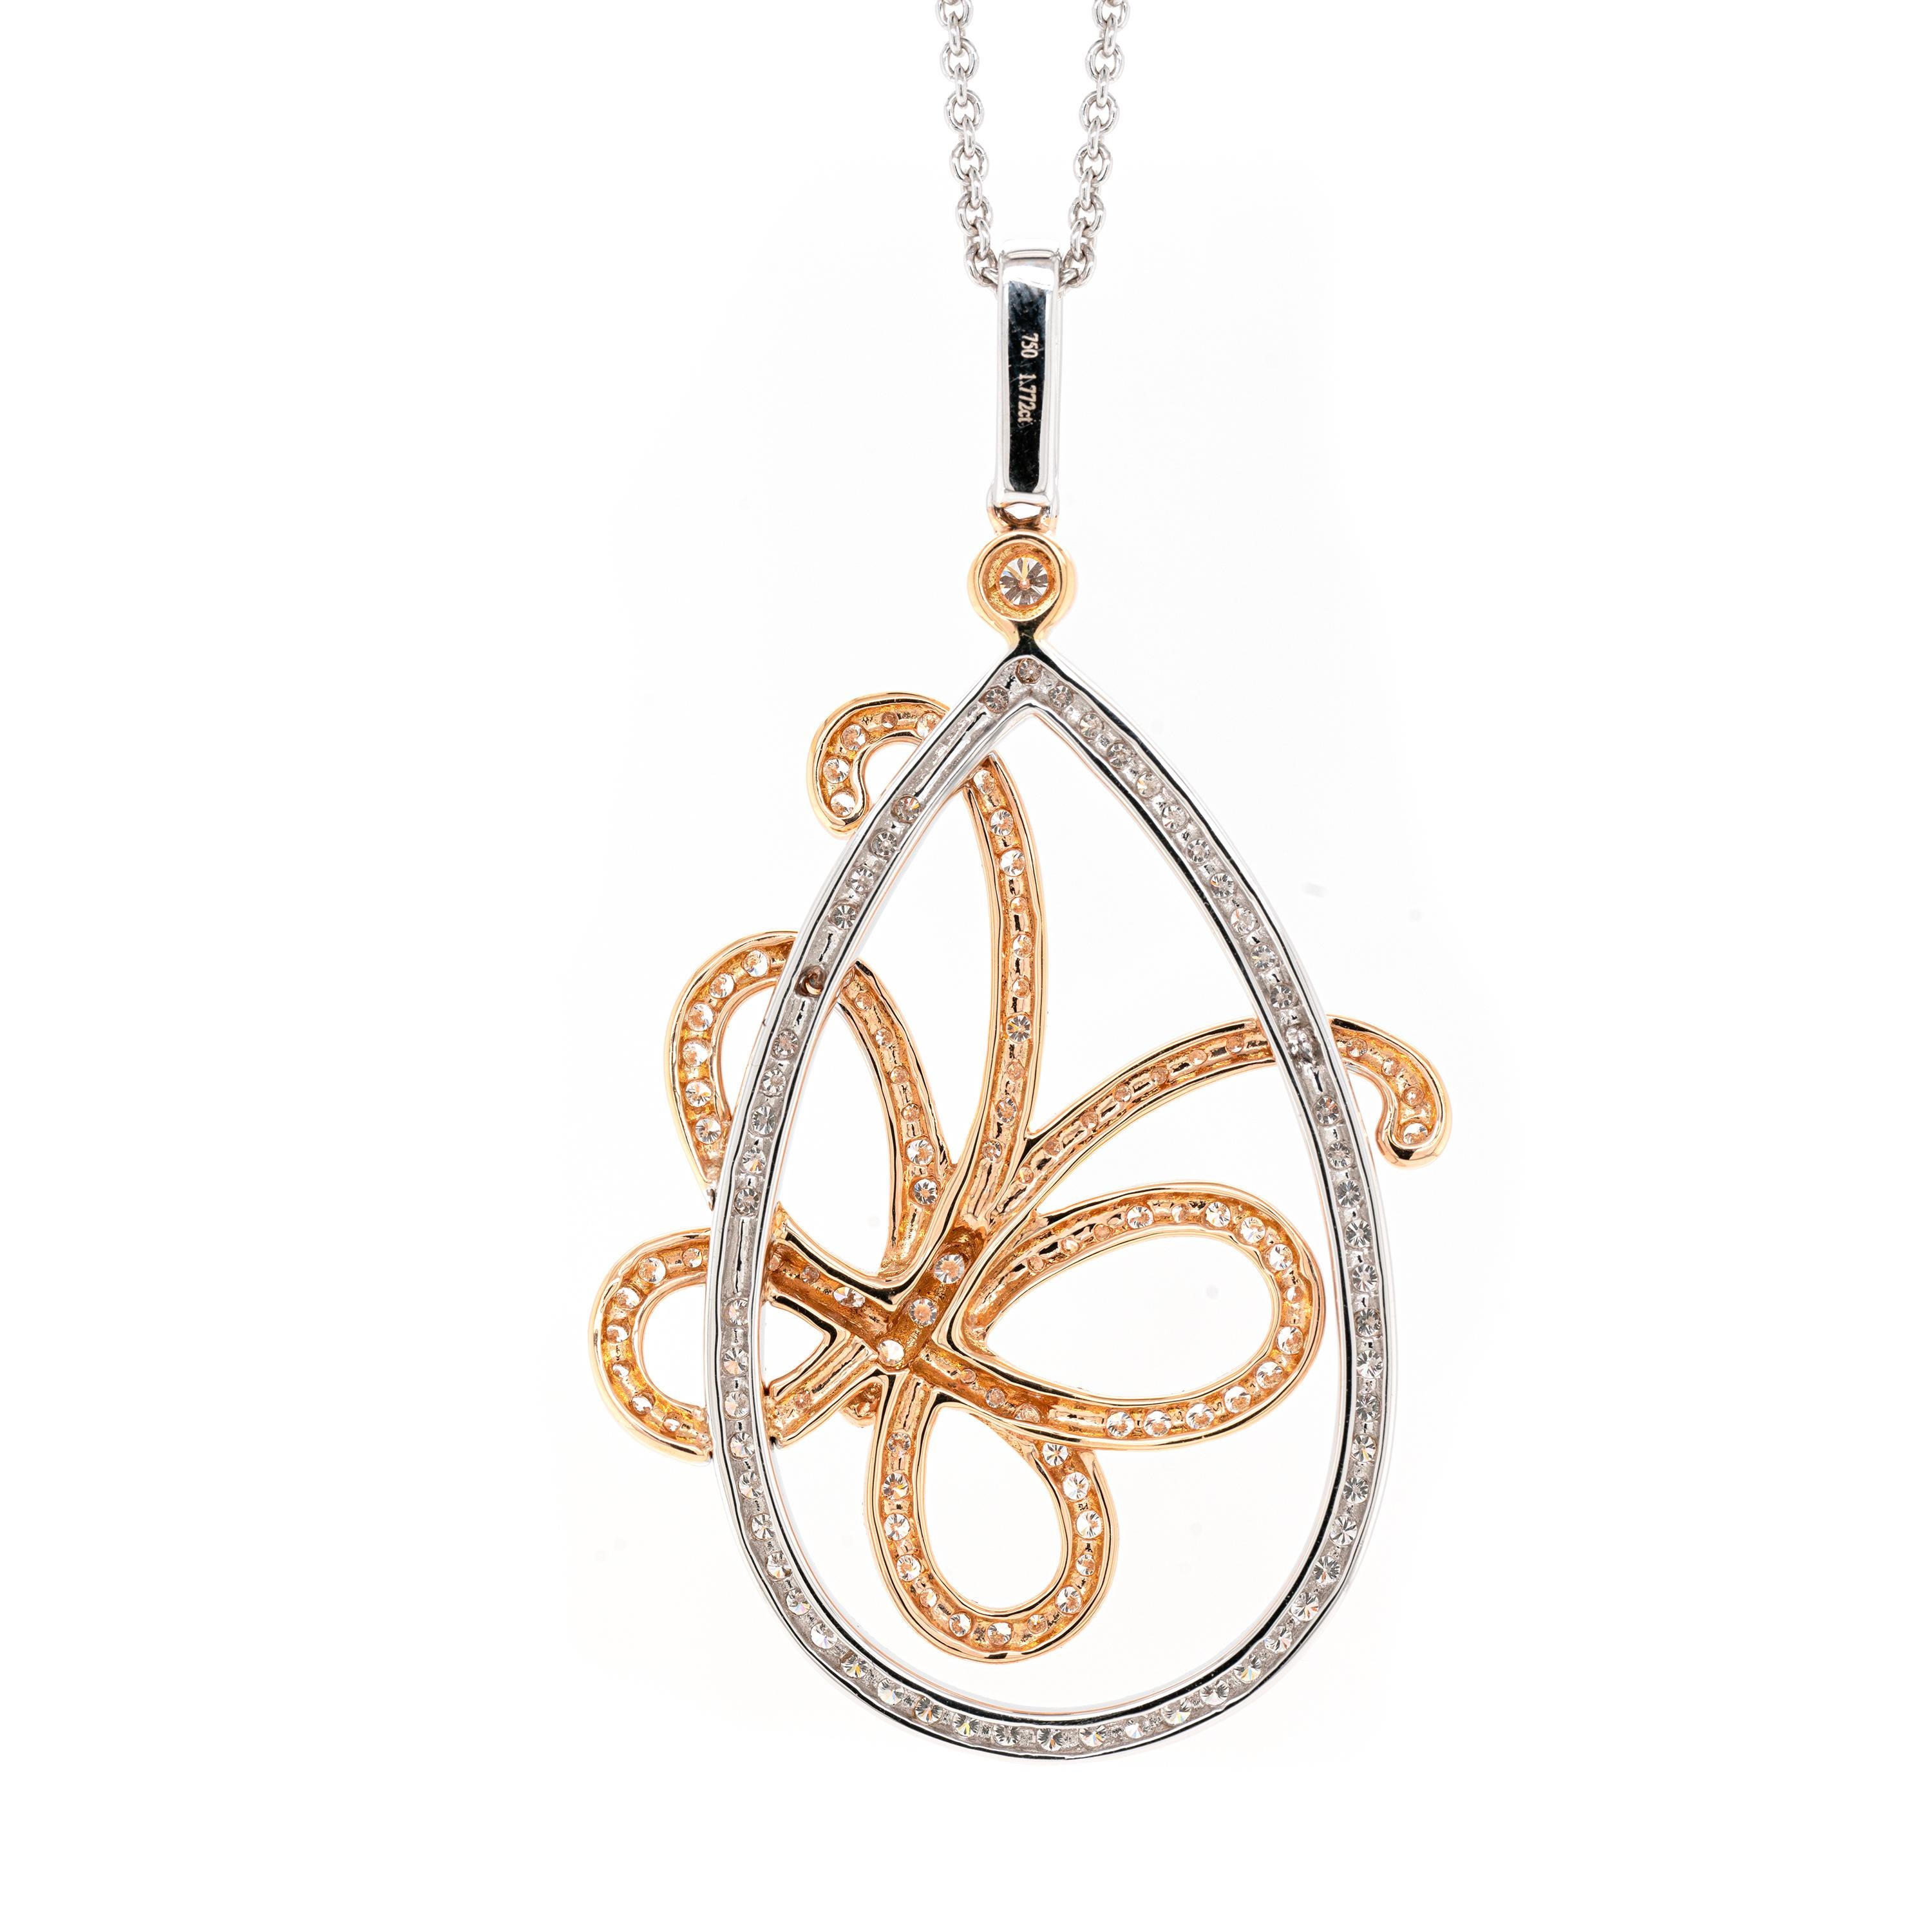 This lovely necklace features a wonderful 18 carat white gold open work teardrop pendant beautifully decorated with a delicate 18 carat rose gold butterfly, known to symbolise hope and rebirth. Fine quality round brilliant cut diamonds scintillate